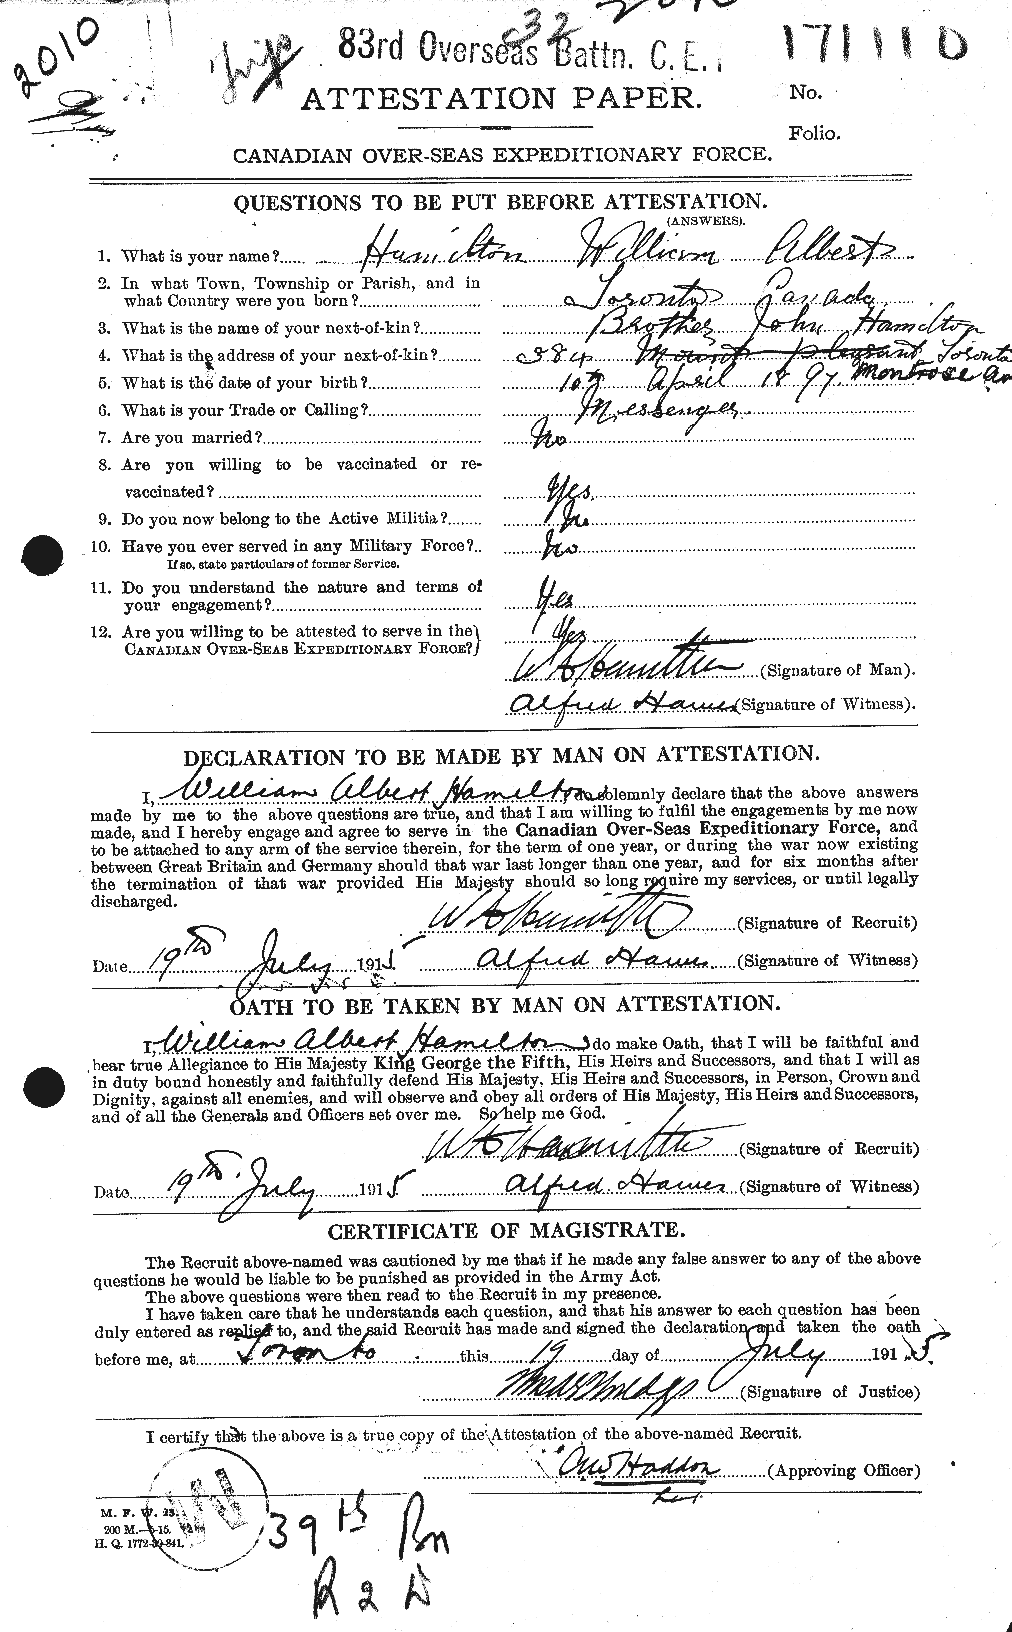 Personnel Records of the First World War - CEF 374874a